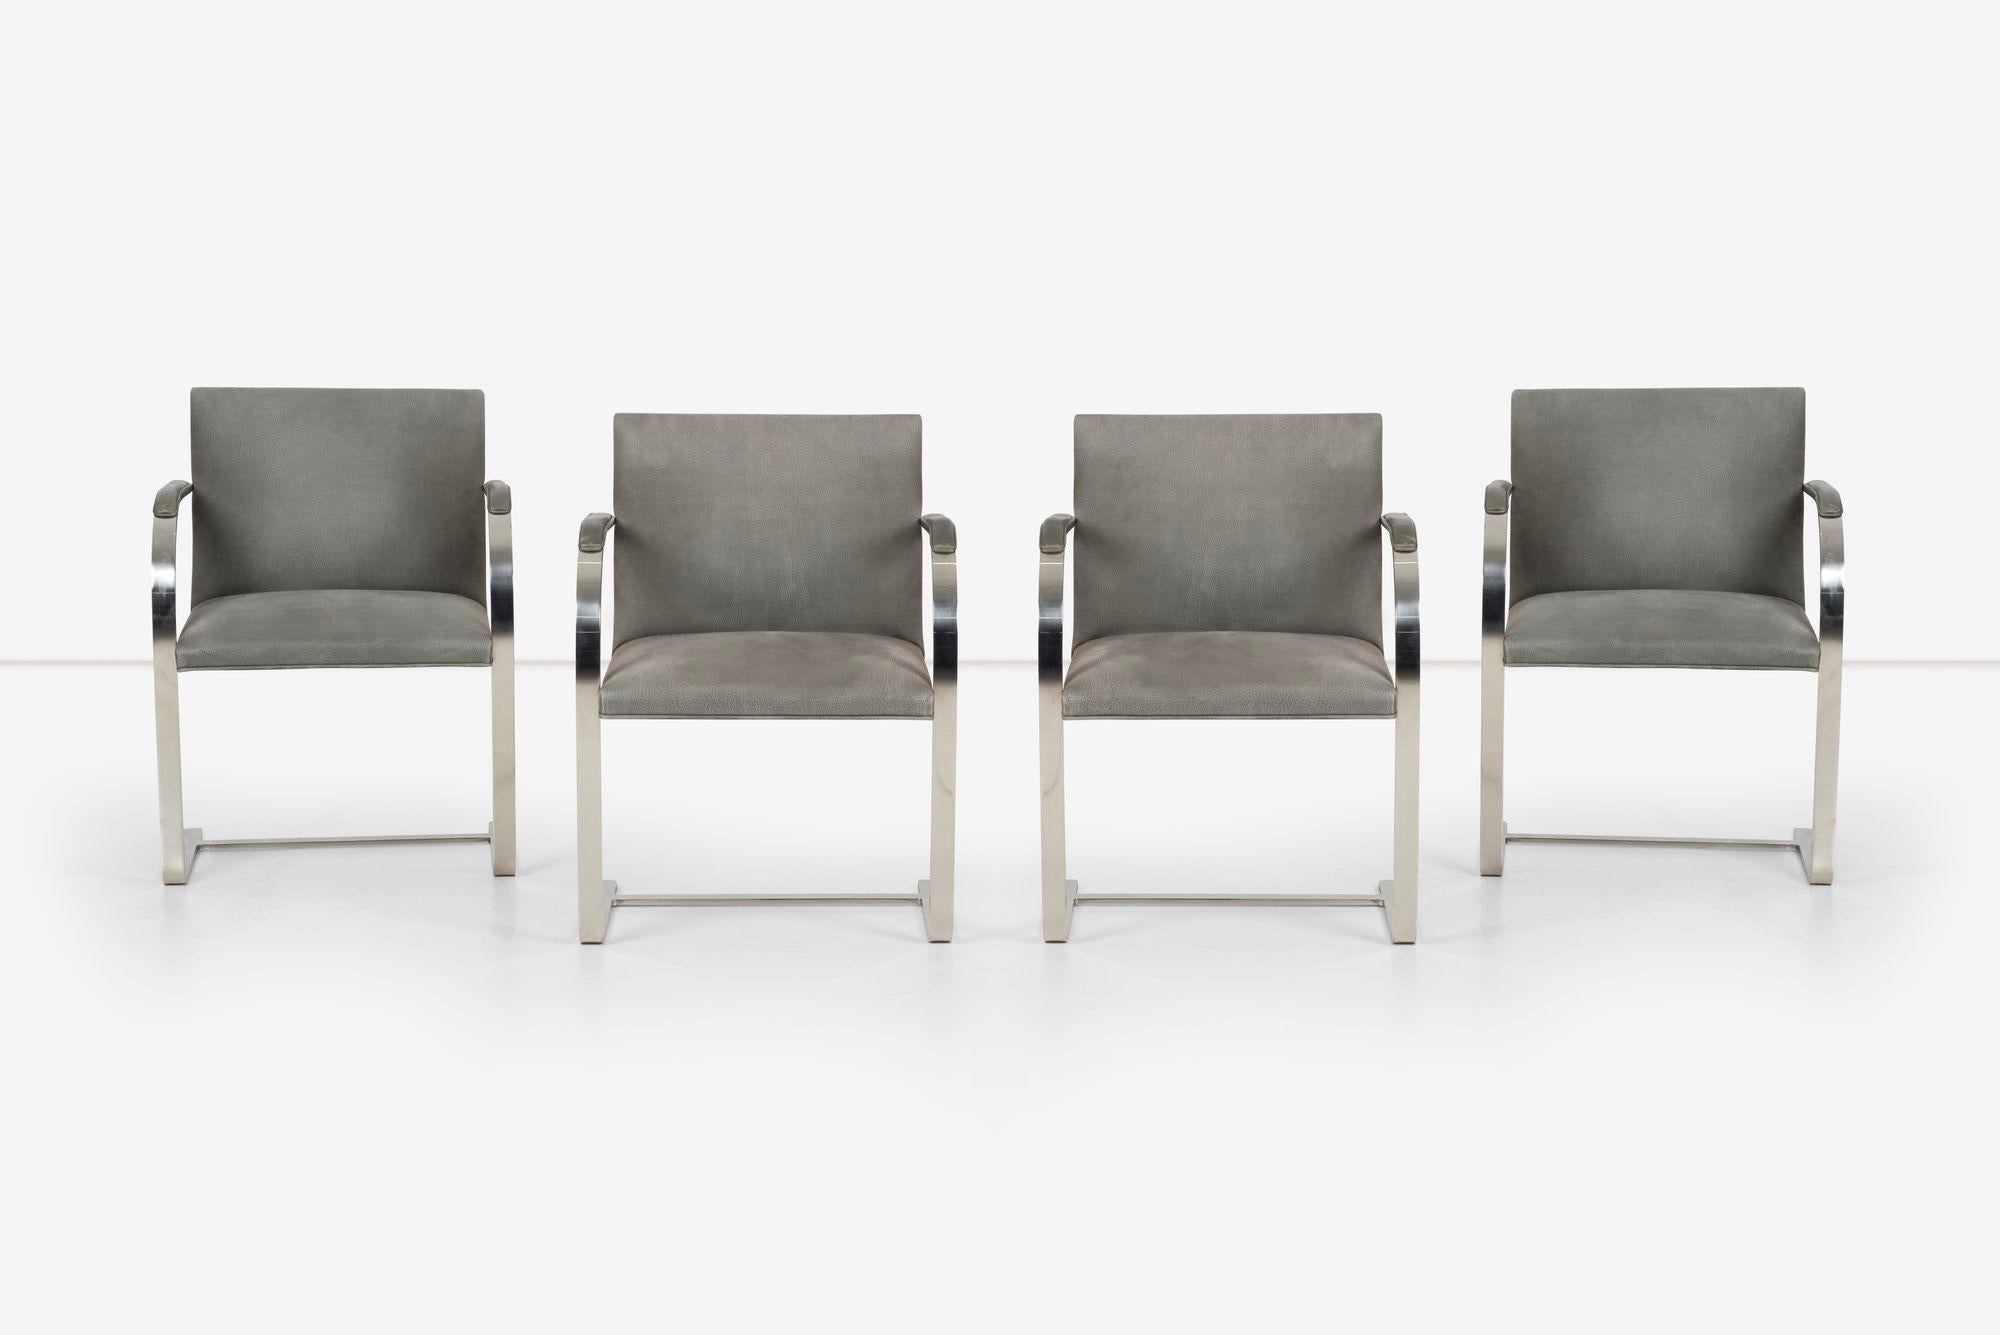 Mies van der Rohe for Knl set of Four Bruno chairs with arm pads, Original Gray leather with stainless steel frames.
* Seat Height (in): 17.5
* Arm Height (in): 25.75

Knl Labels on the underside.